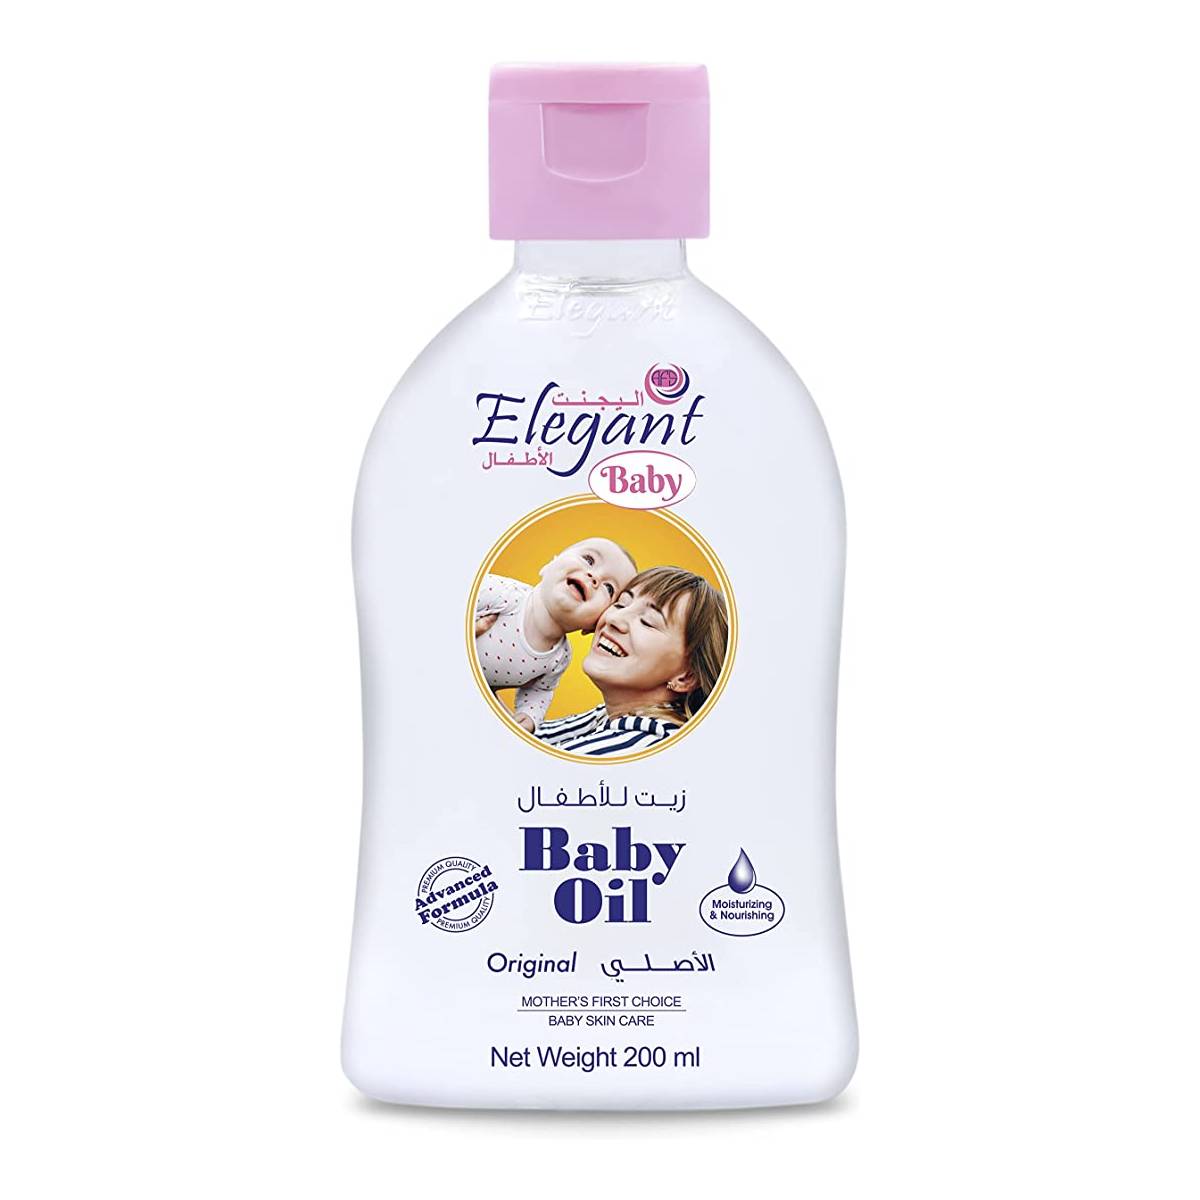 What Are Ingredients Used In Baby Shower Gel? 